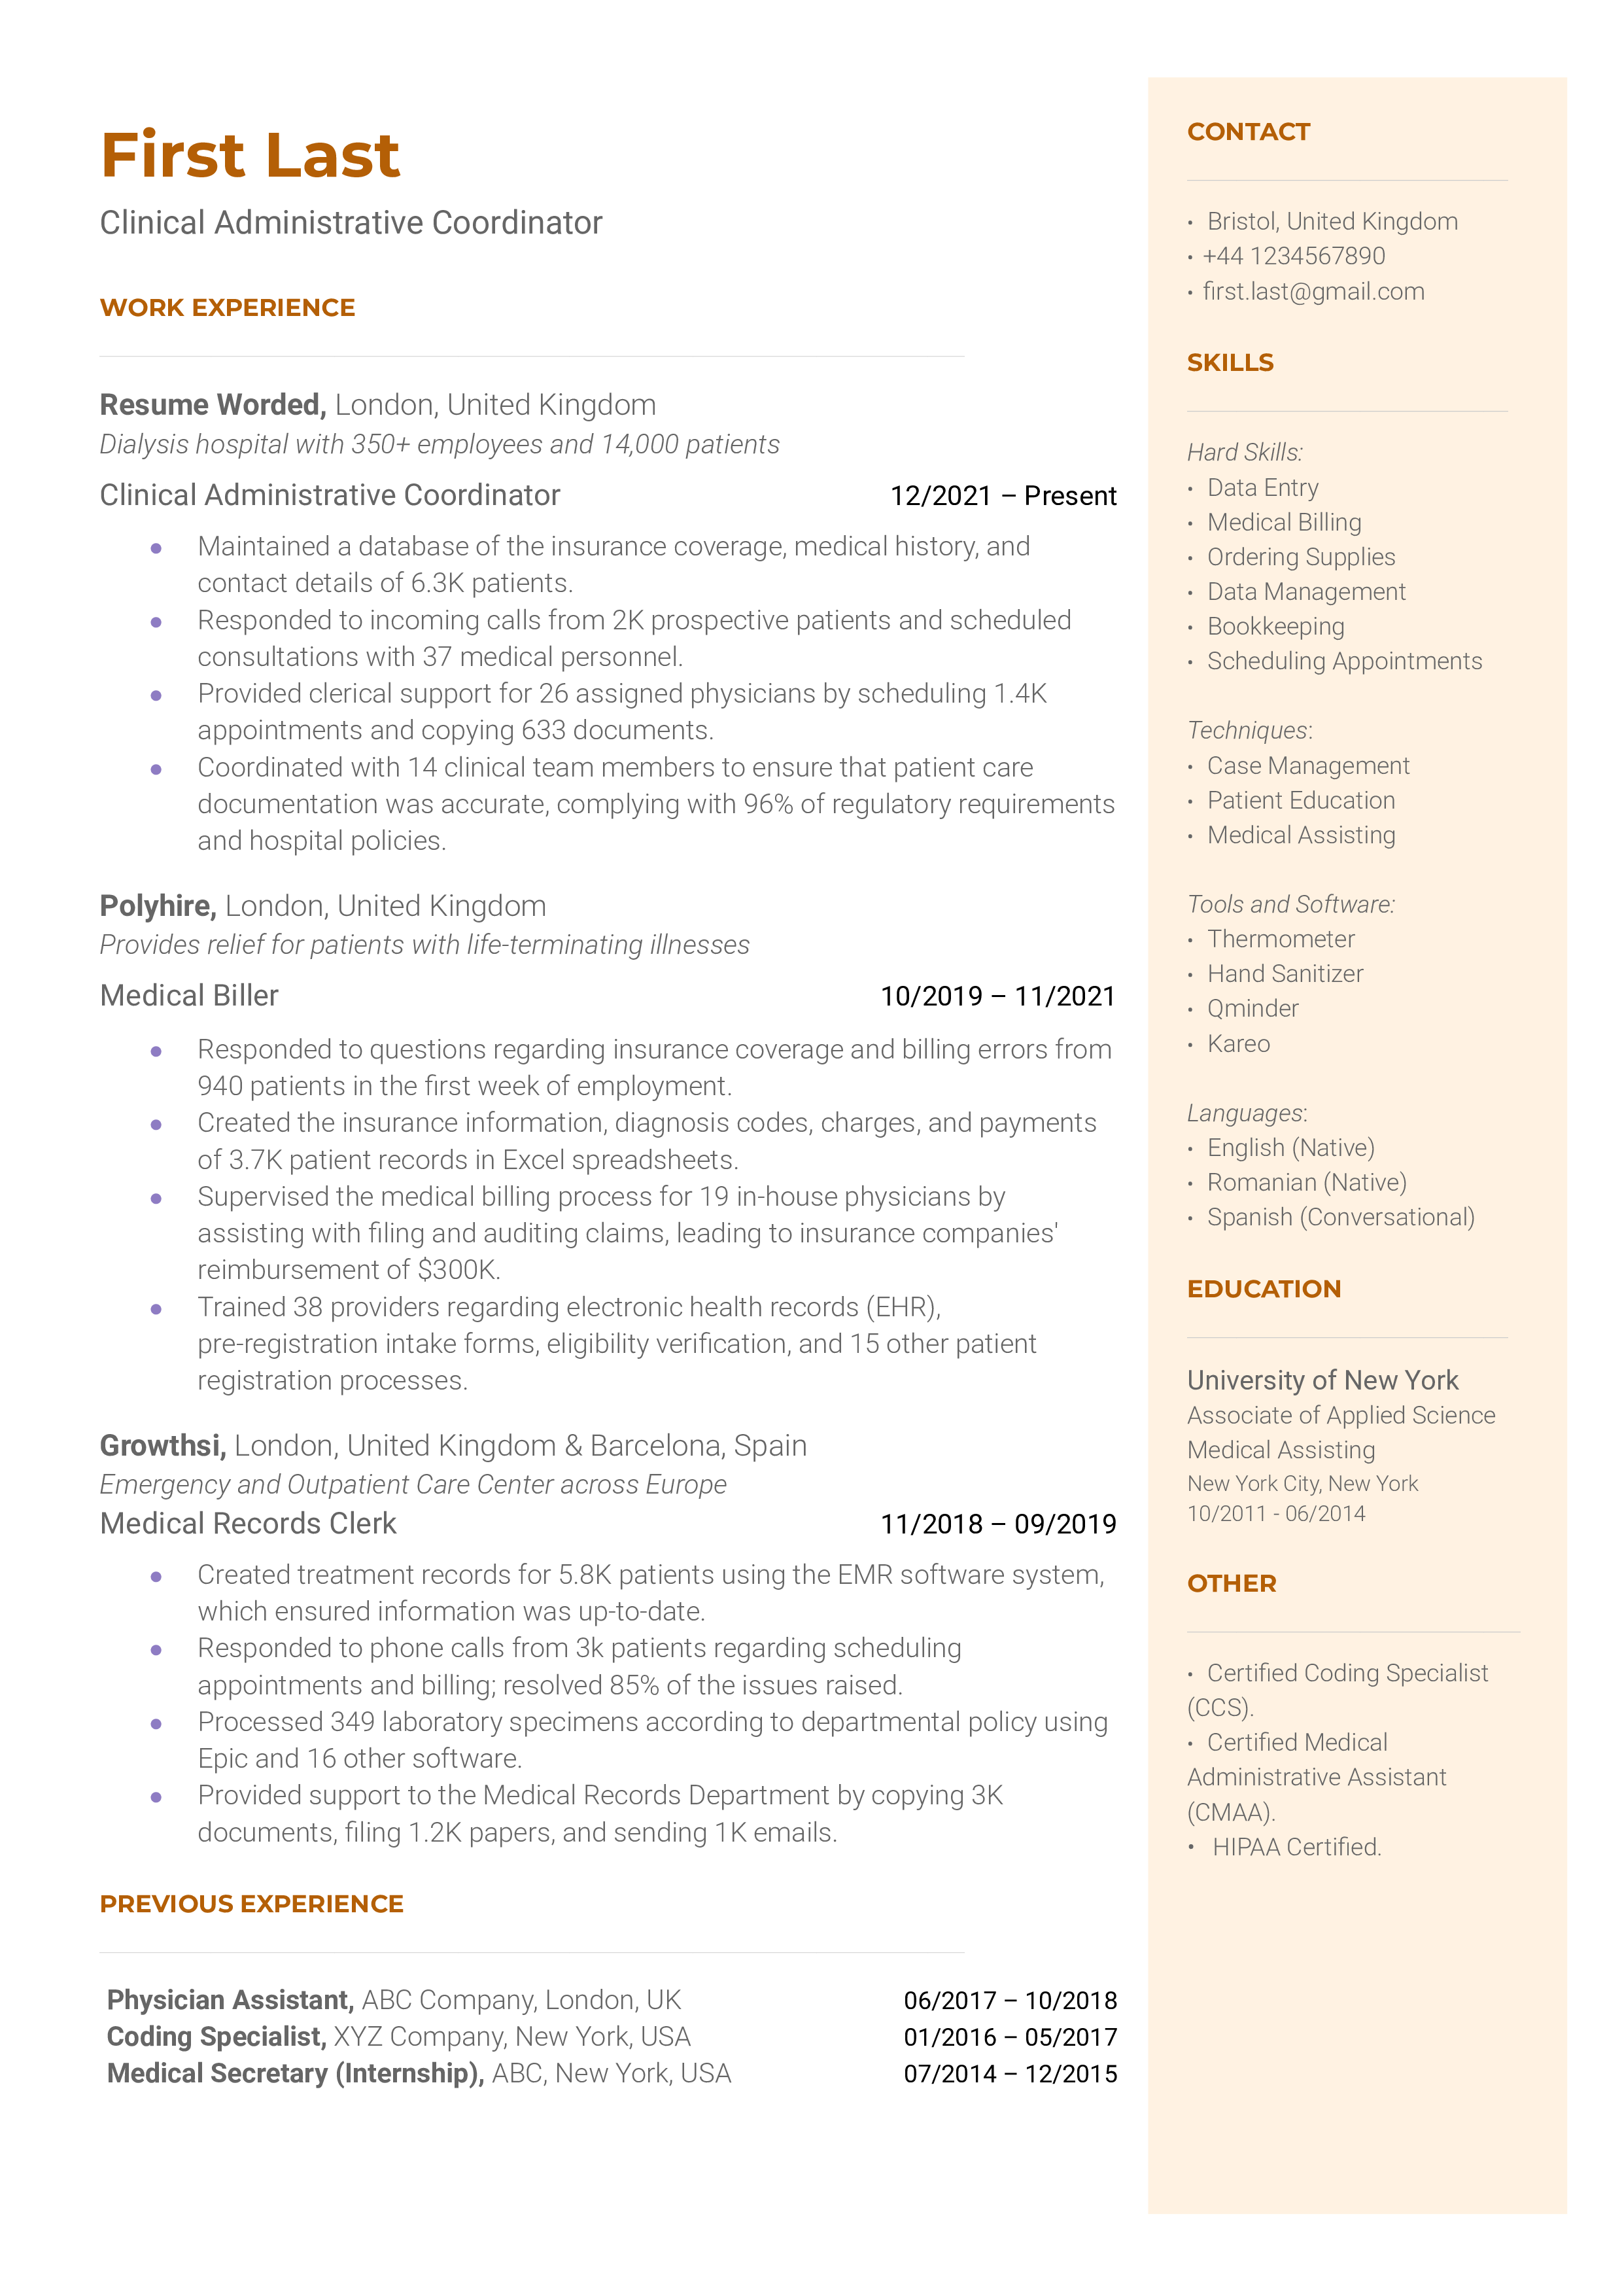 CV of a Clinical Administrative Coordinator showcasing software proficiency and liaison experience.